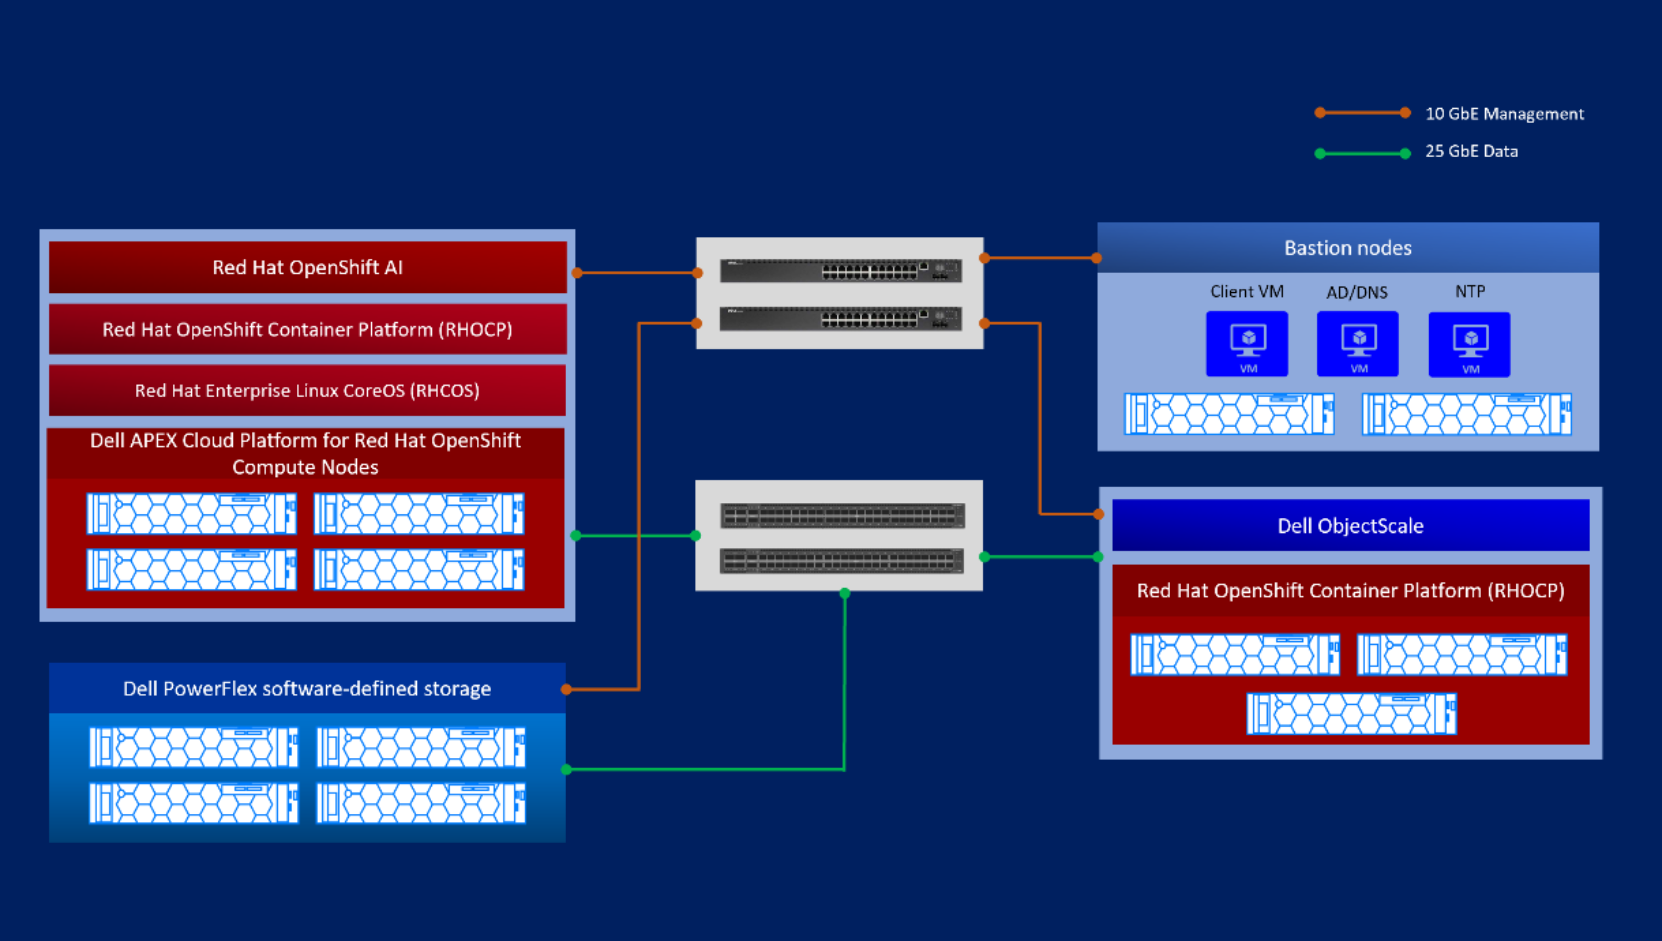 This diagram includes Red Hat OpenShift AI, Red Hat Openshift Container Platform, Dell APEX Cloud Platform for Red Hat OpenShift compute nodes, Dell PowerFlex software-defined-storage, bastion nodes, and Dell ObjectScale